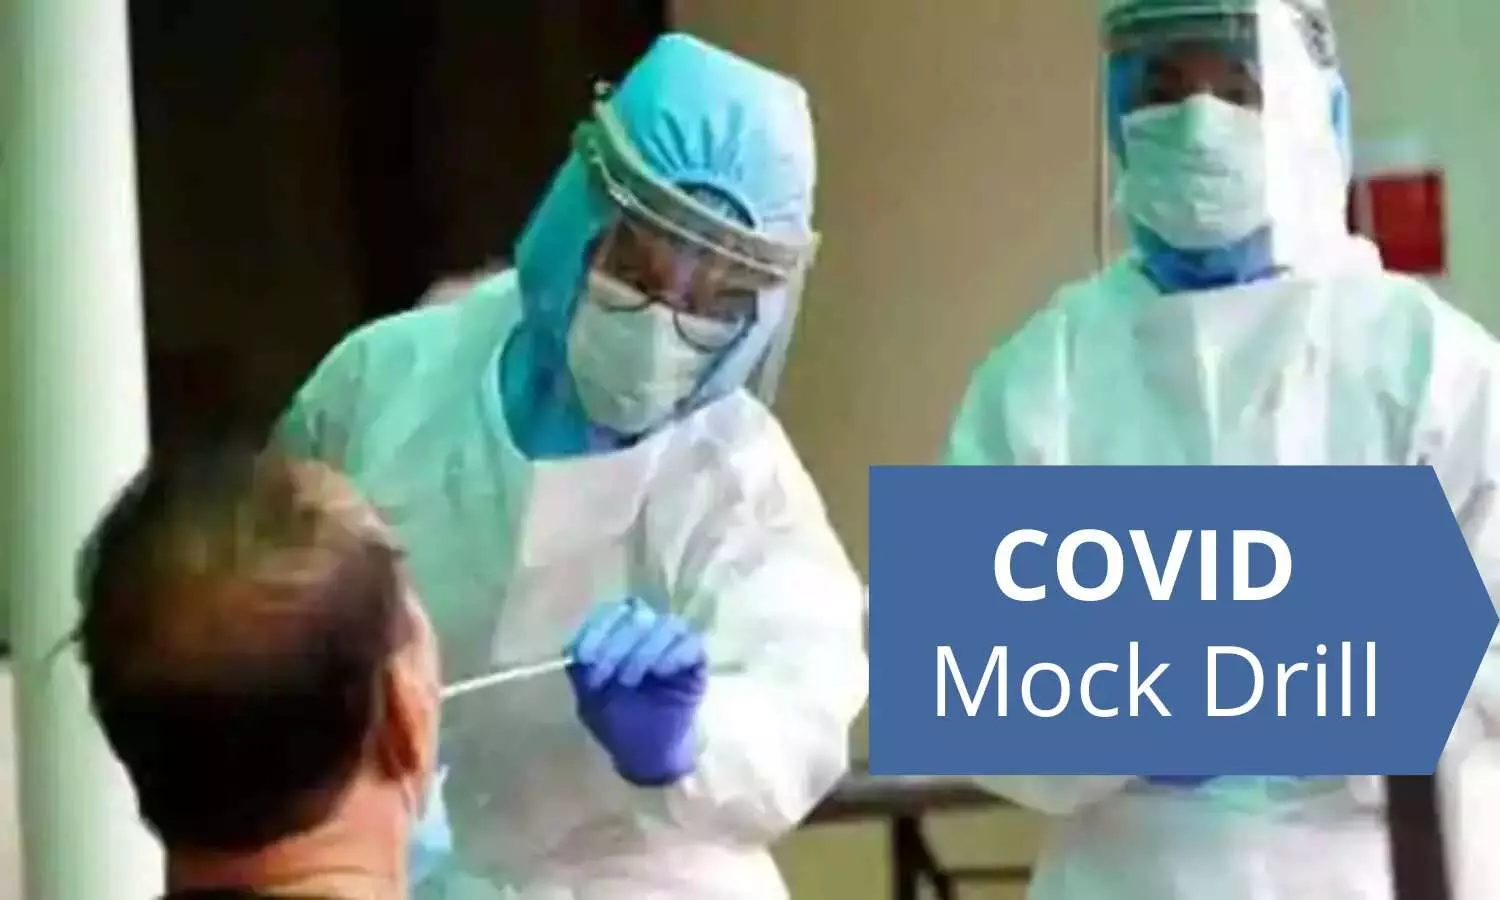 Kerala: Kozhikode Medical College conducts COVID-19 mock drill